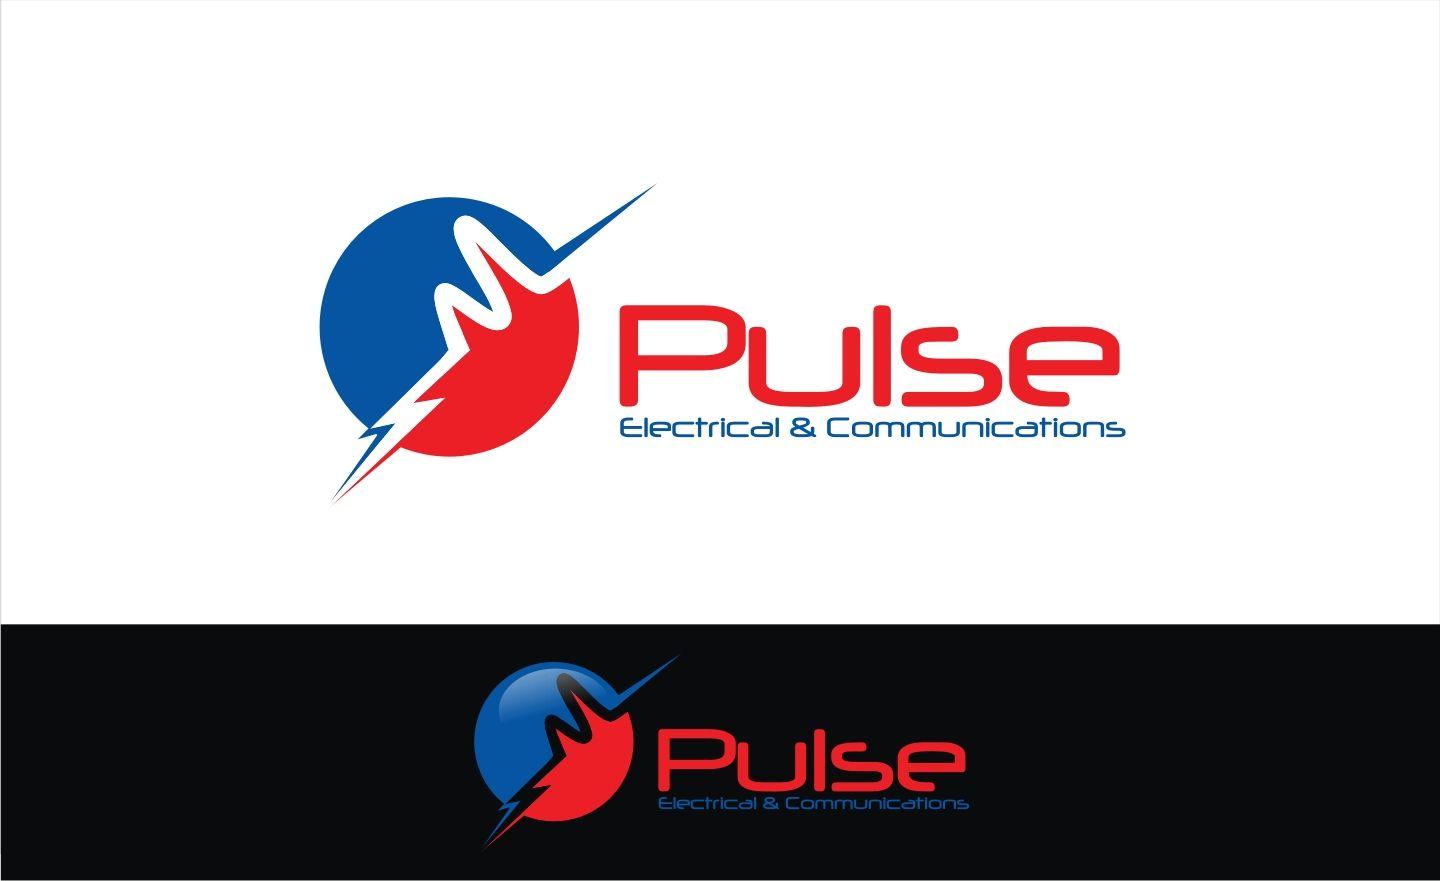 Communication Company Logo - Professional, Serious, Electrical Logo Design for Pulse Electrical